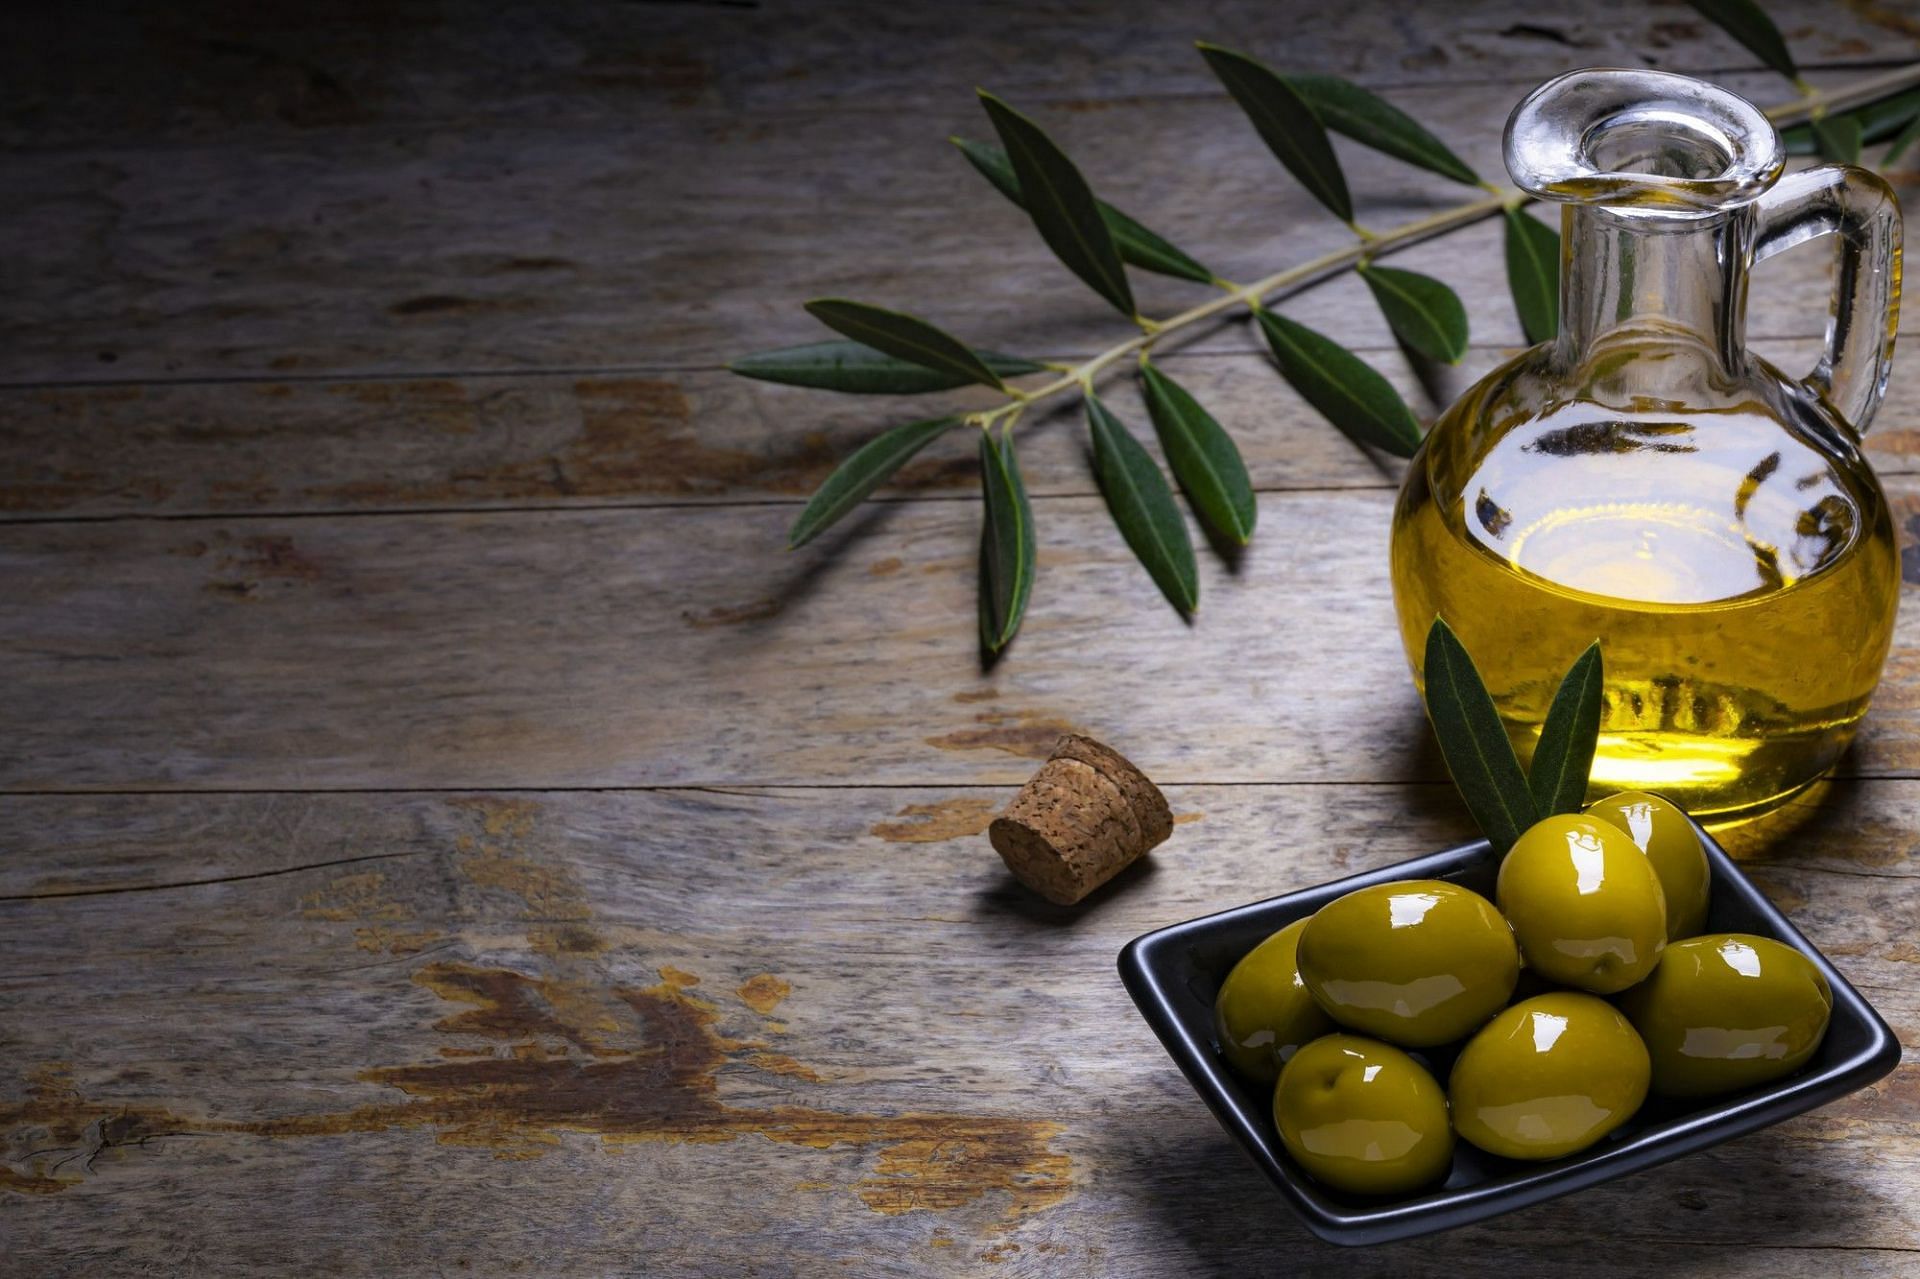 Is drinking olive oil safe? (Image by wirestock on Freepik)